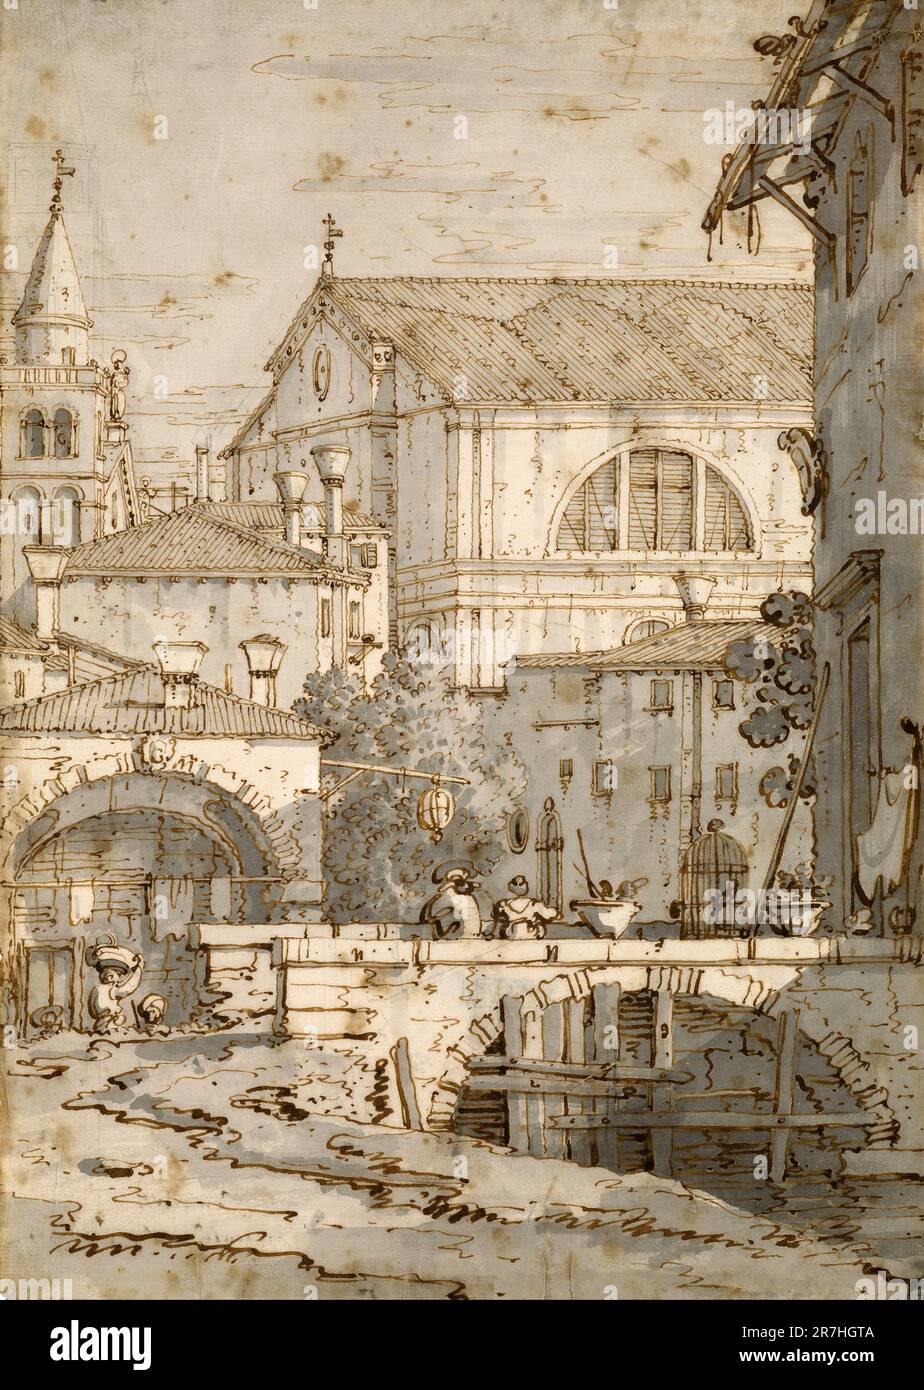 Architectural Capriccio  painted by the Venetian painter Giovanni Antonio Canal, commonly known as Canaletto.  Canaletto specialised in realsitic city scenes (called Verduti) but occasionally he painted from his imagination, which he called Capriccio. Stock Photo